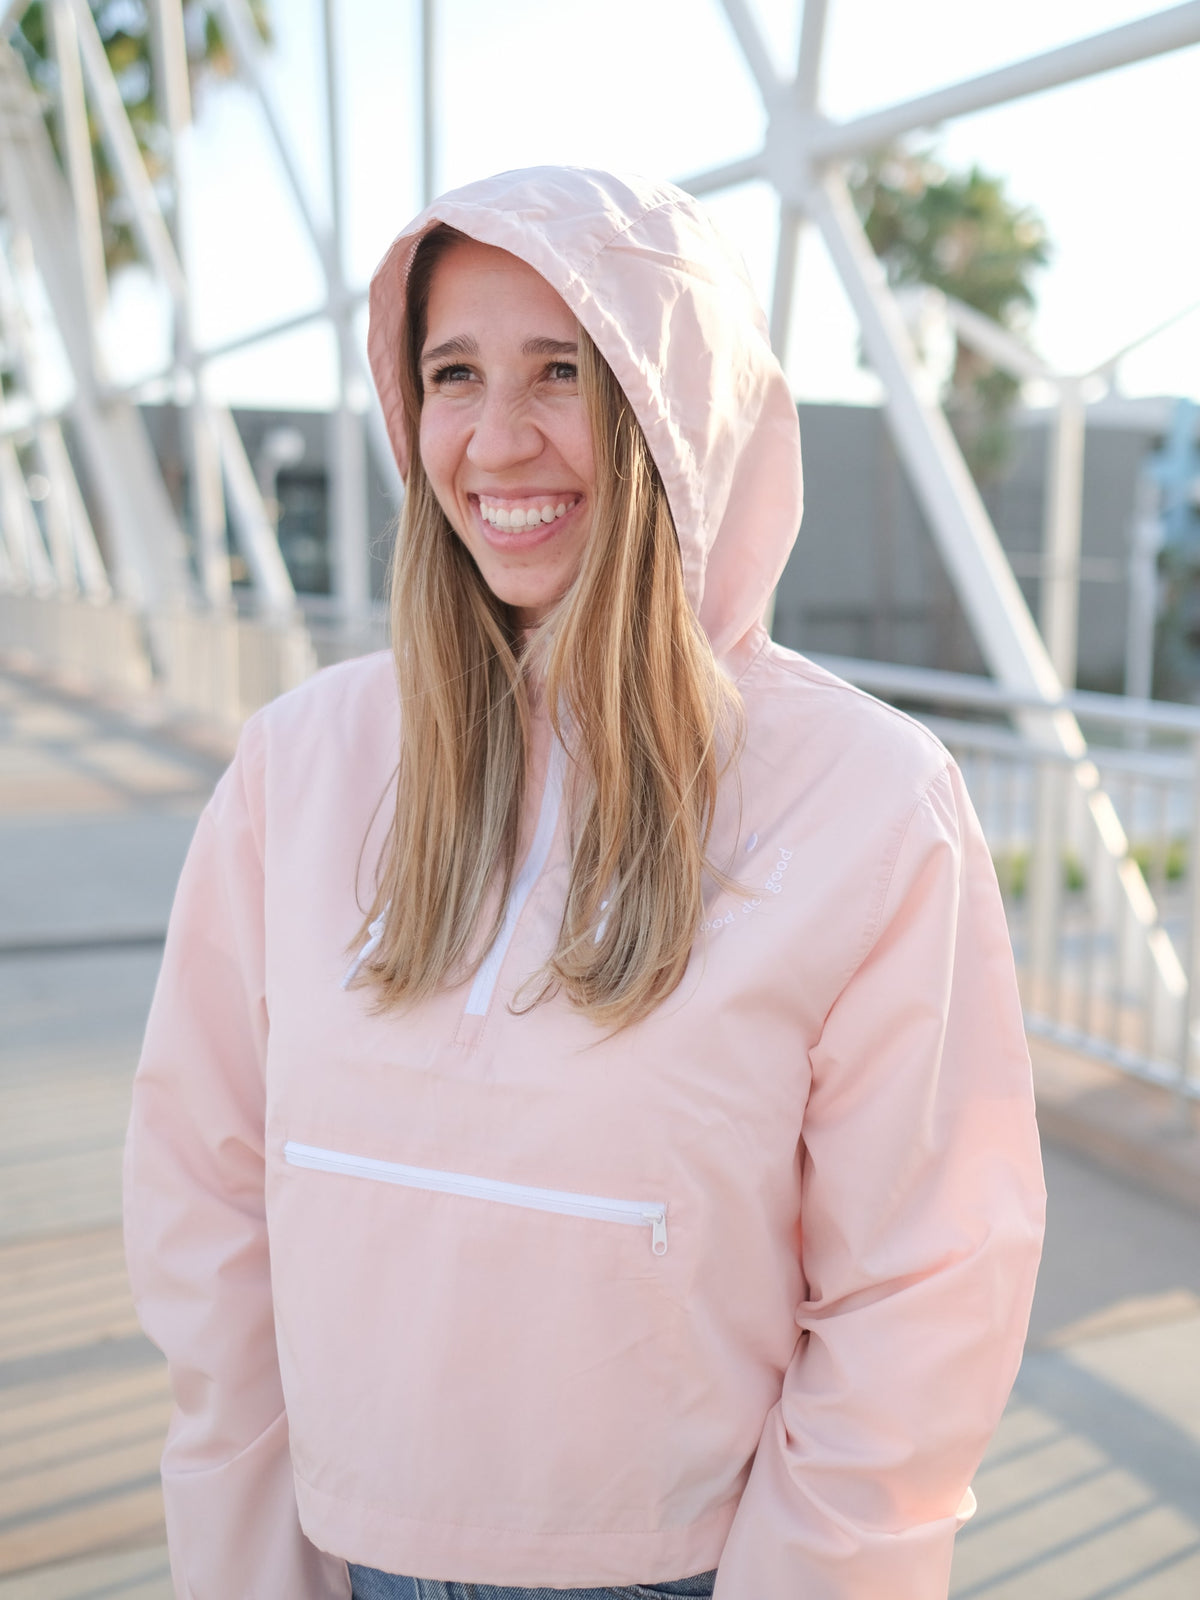 Blush Pink Windbreaker with a white zipper and a happy face embroidered on it. The happy face has the words "do good" written on it. This Christian women's jacket is based on Ecclesiastes 3:12 and our brand name Rejoice & Do Good